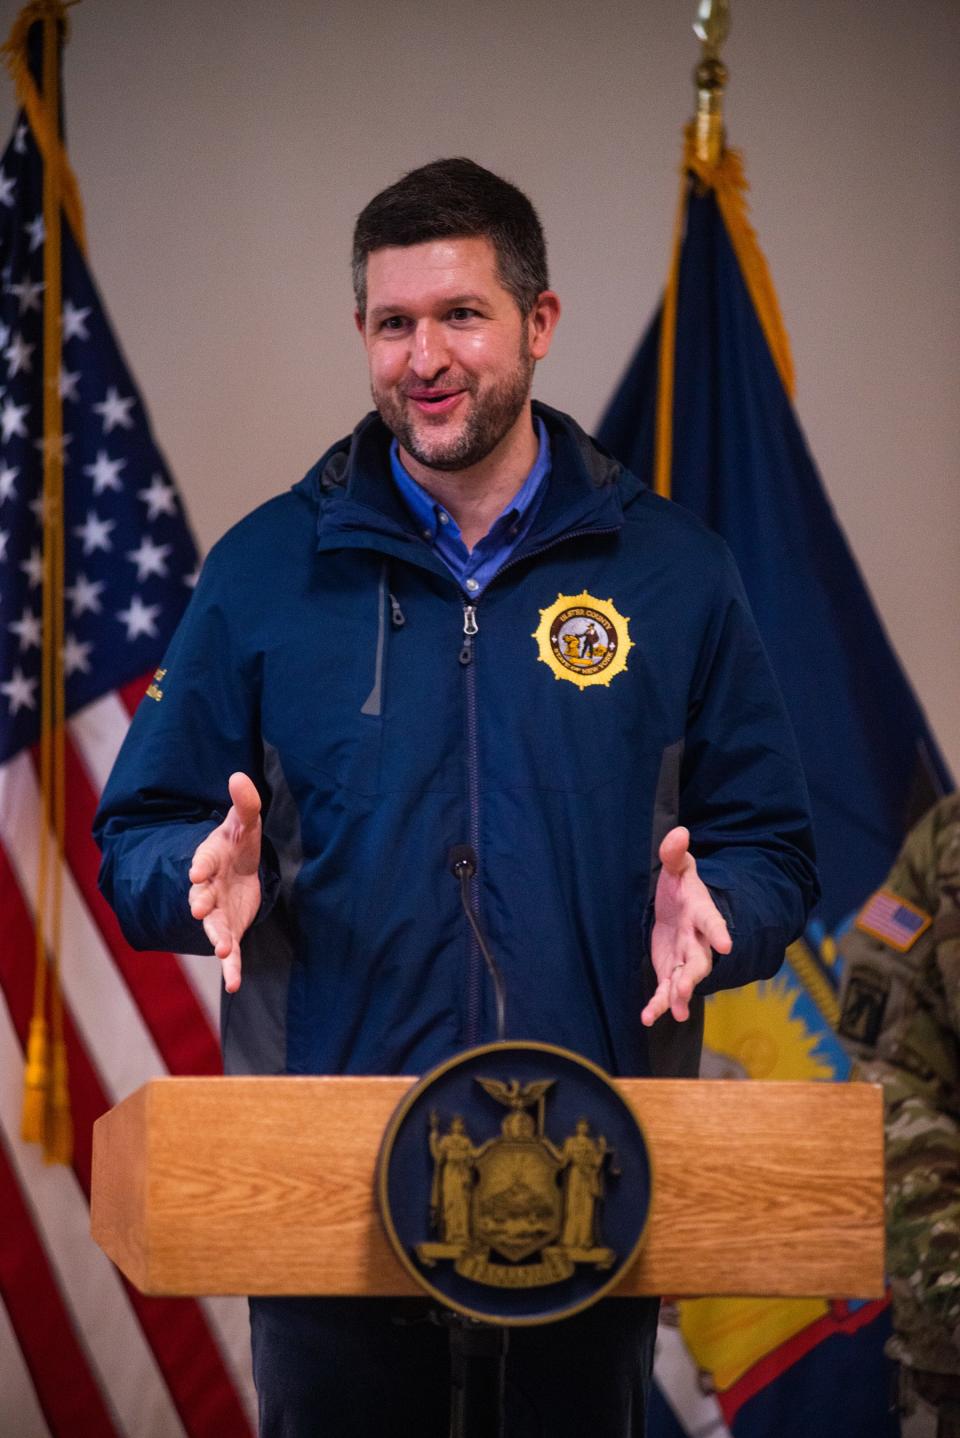 Ulster County Executive Pat Ryan talks during a press conference at the Ulster County Sheriff's Office in Kingston, NY on Monday, February 7, 2022.